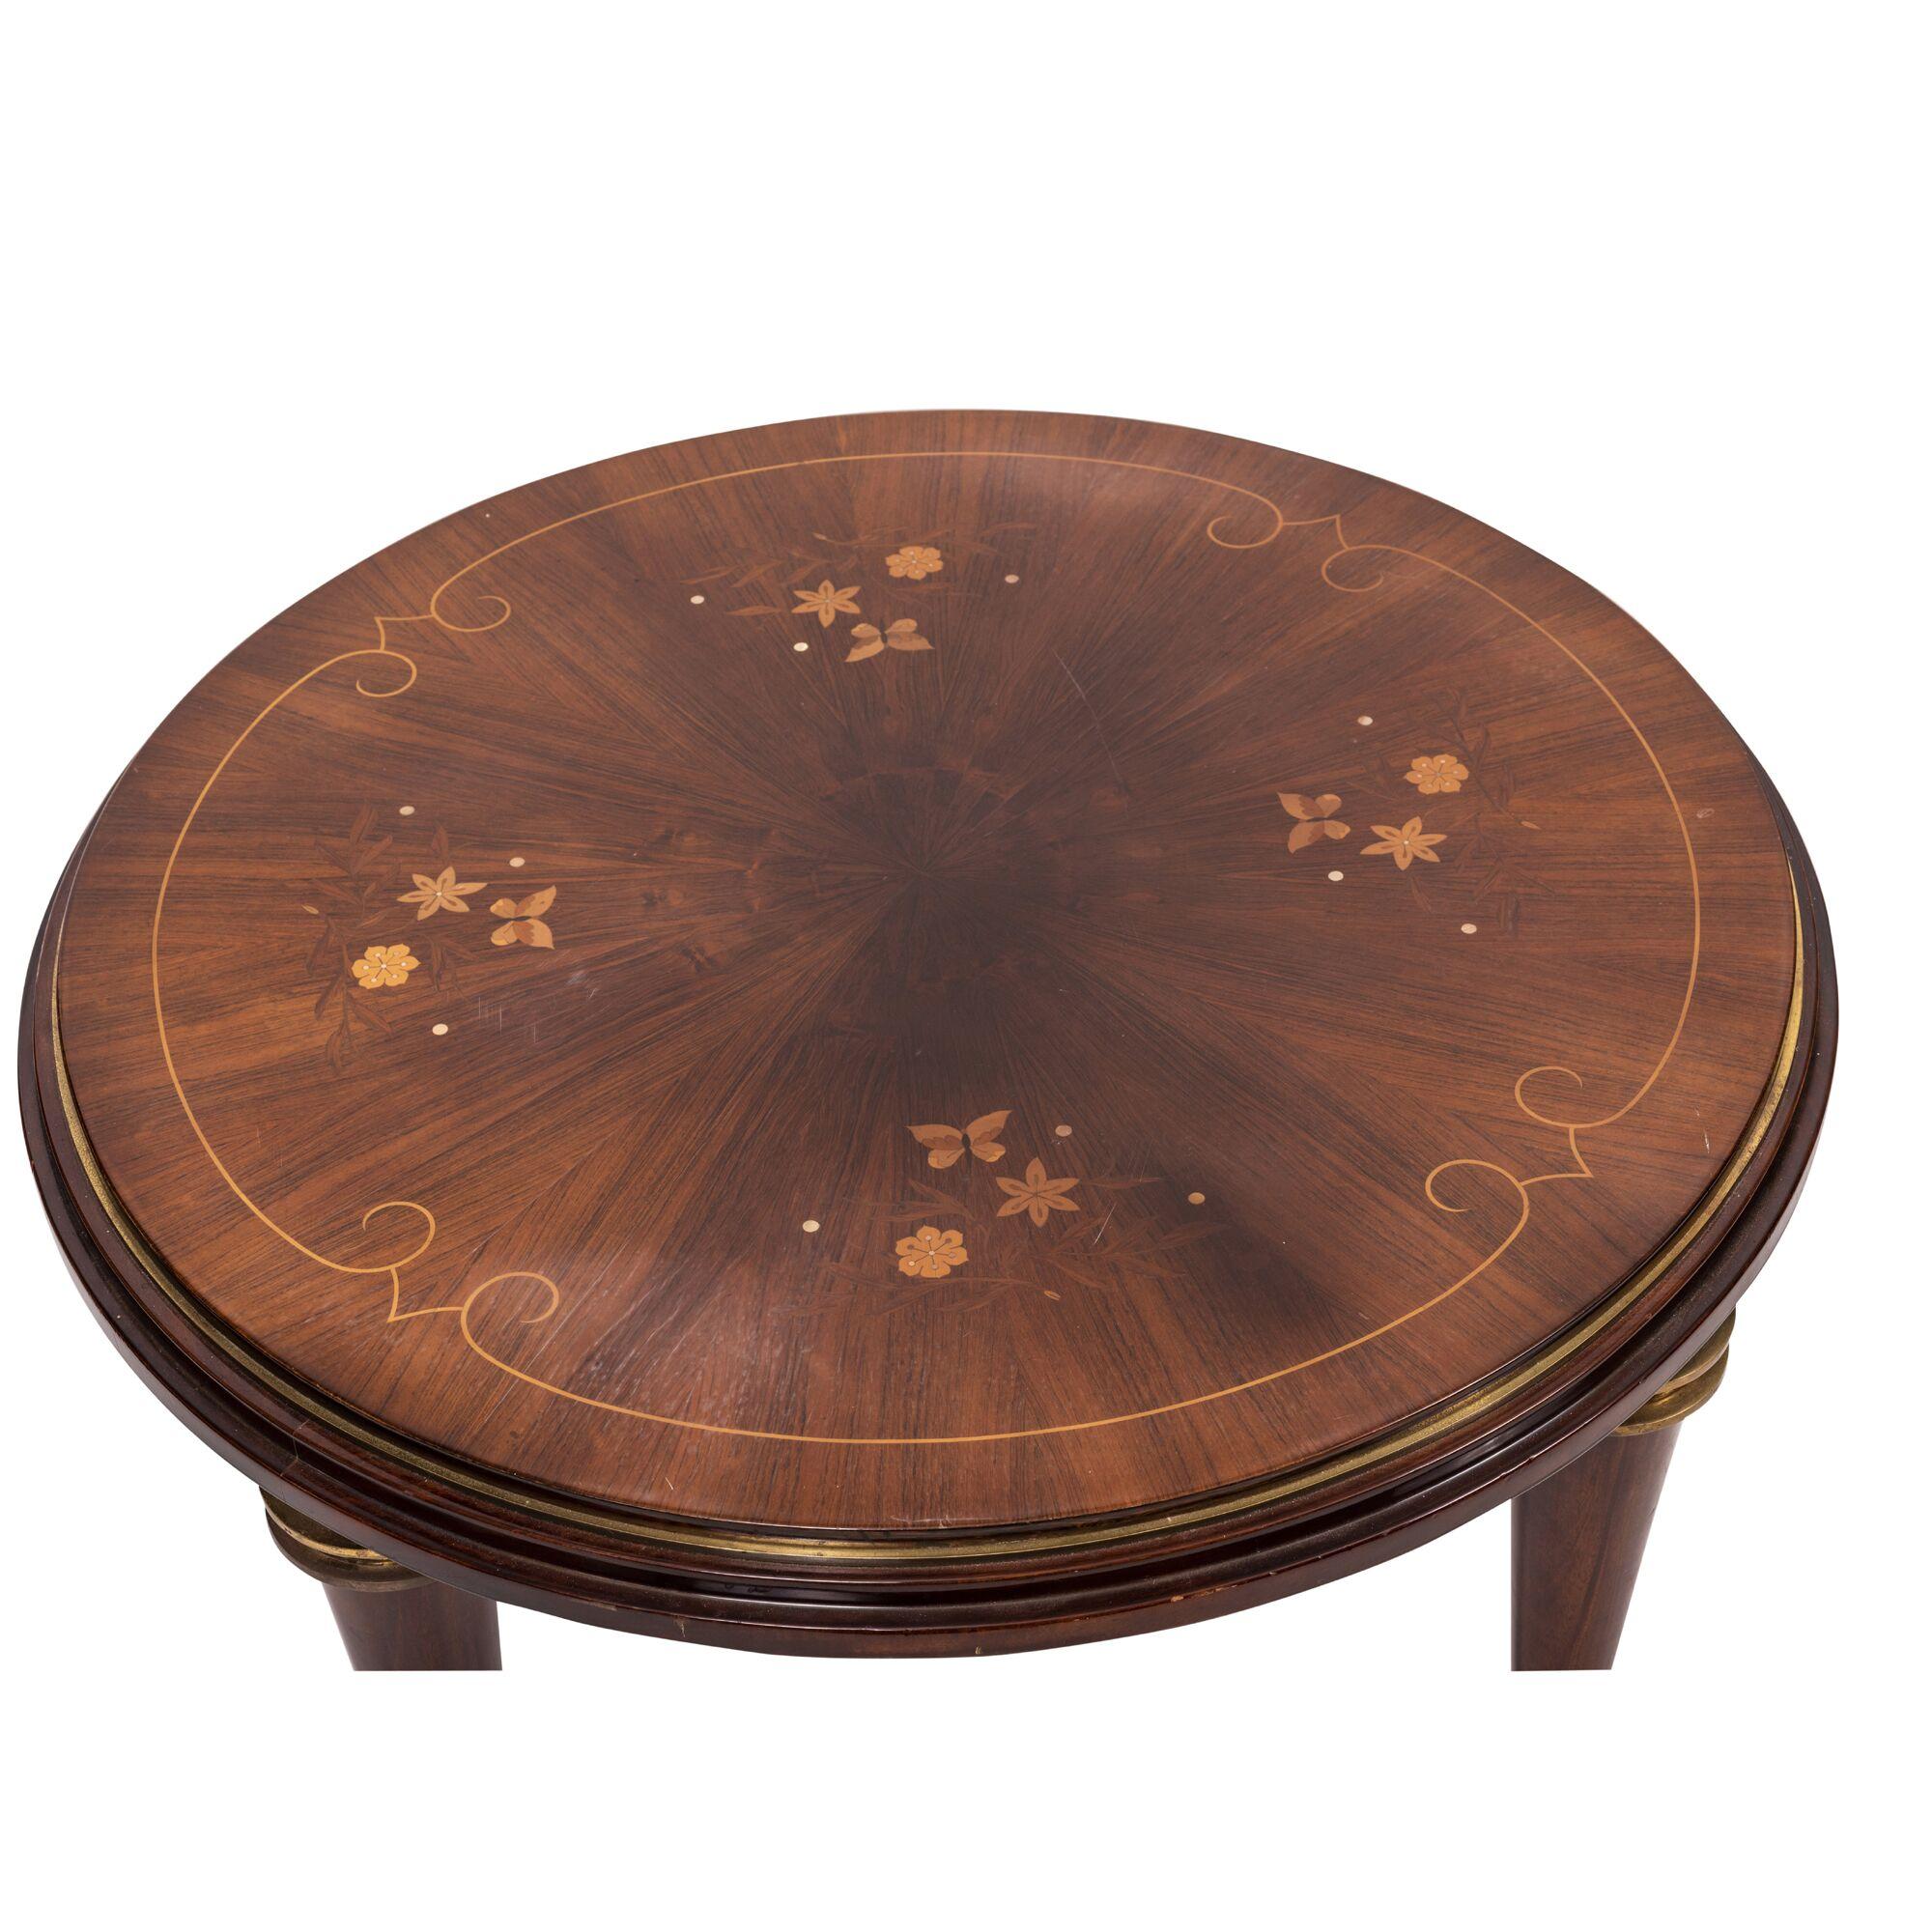 Bronze mounted circular low table, by Jules Leleu.
Rosewood inlaid top having floral and butterfly inlays in a variety of woods and abalone, circa 1925.
Measures: Height 17 5/8 in. (44.76 cm.); Diameter 33 1/2 in. (85.09).
 